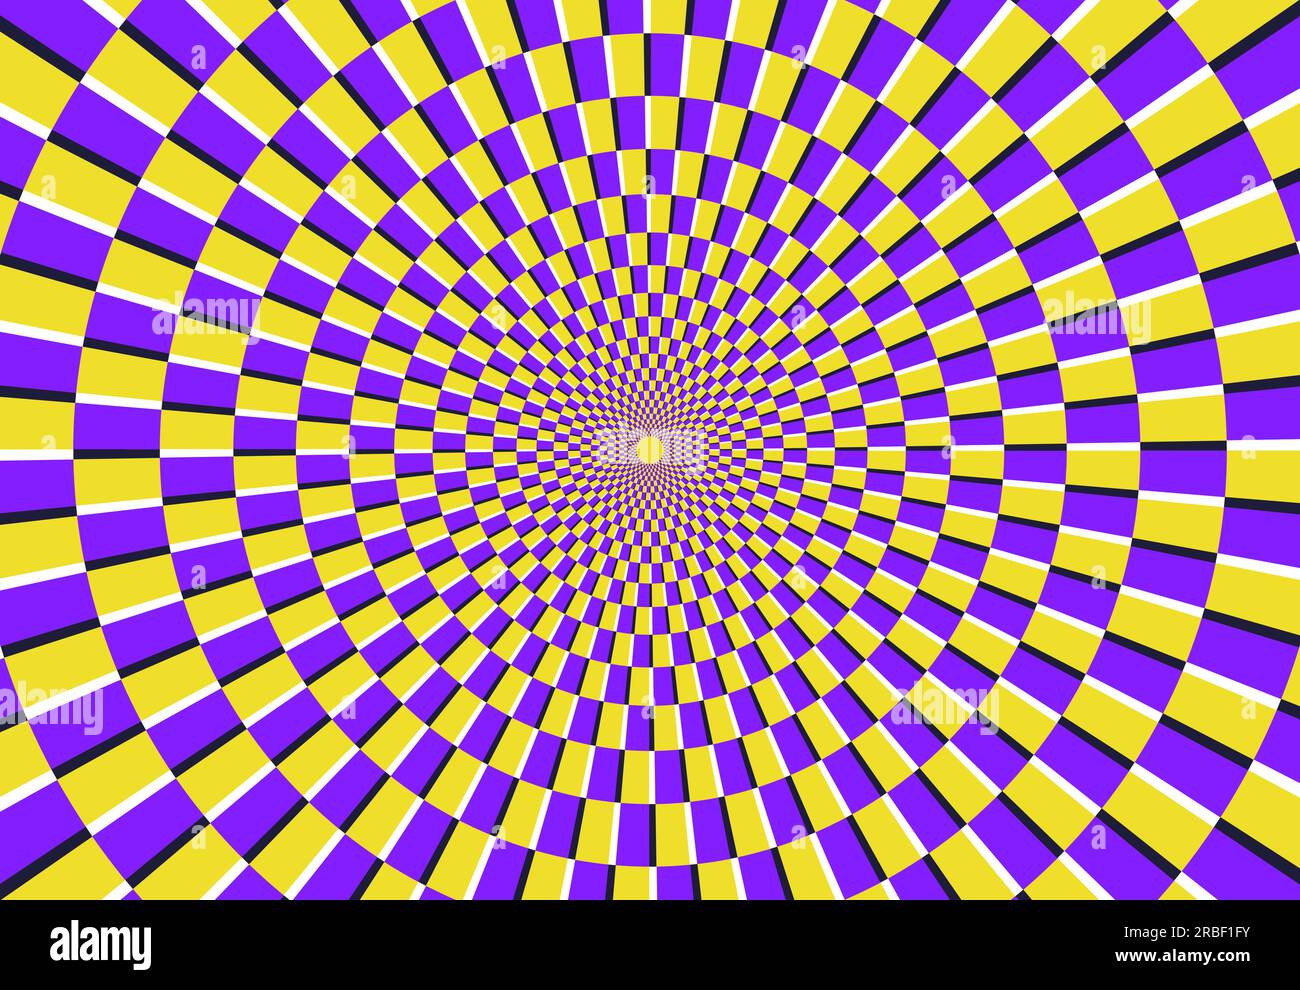 https://c8.alamy.com/comp/2RBF1FY/optical-spiral-illusion-magic-psychedelic-pattern-swirl-illusions-and-hypnotic-abstract-background-abstract-spiral-motion-circular-fractal-illusor-2RBF1FY.jpg